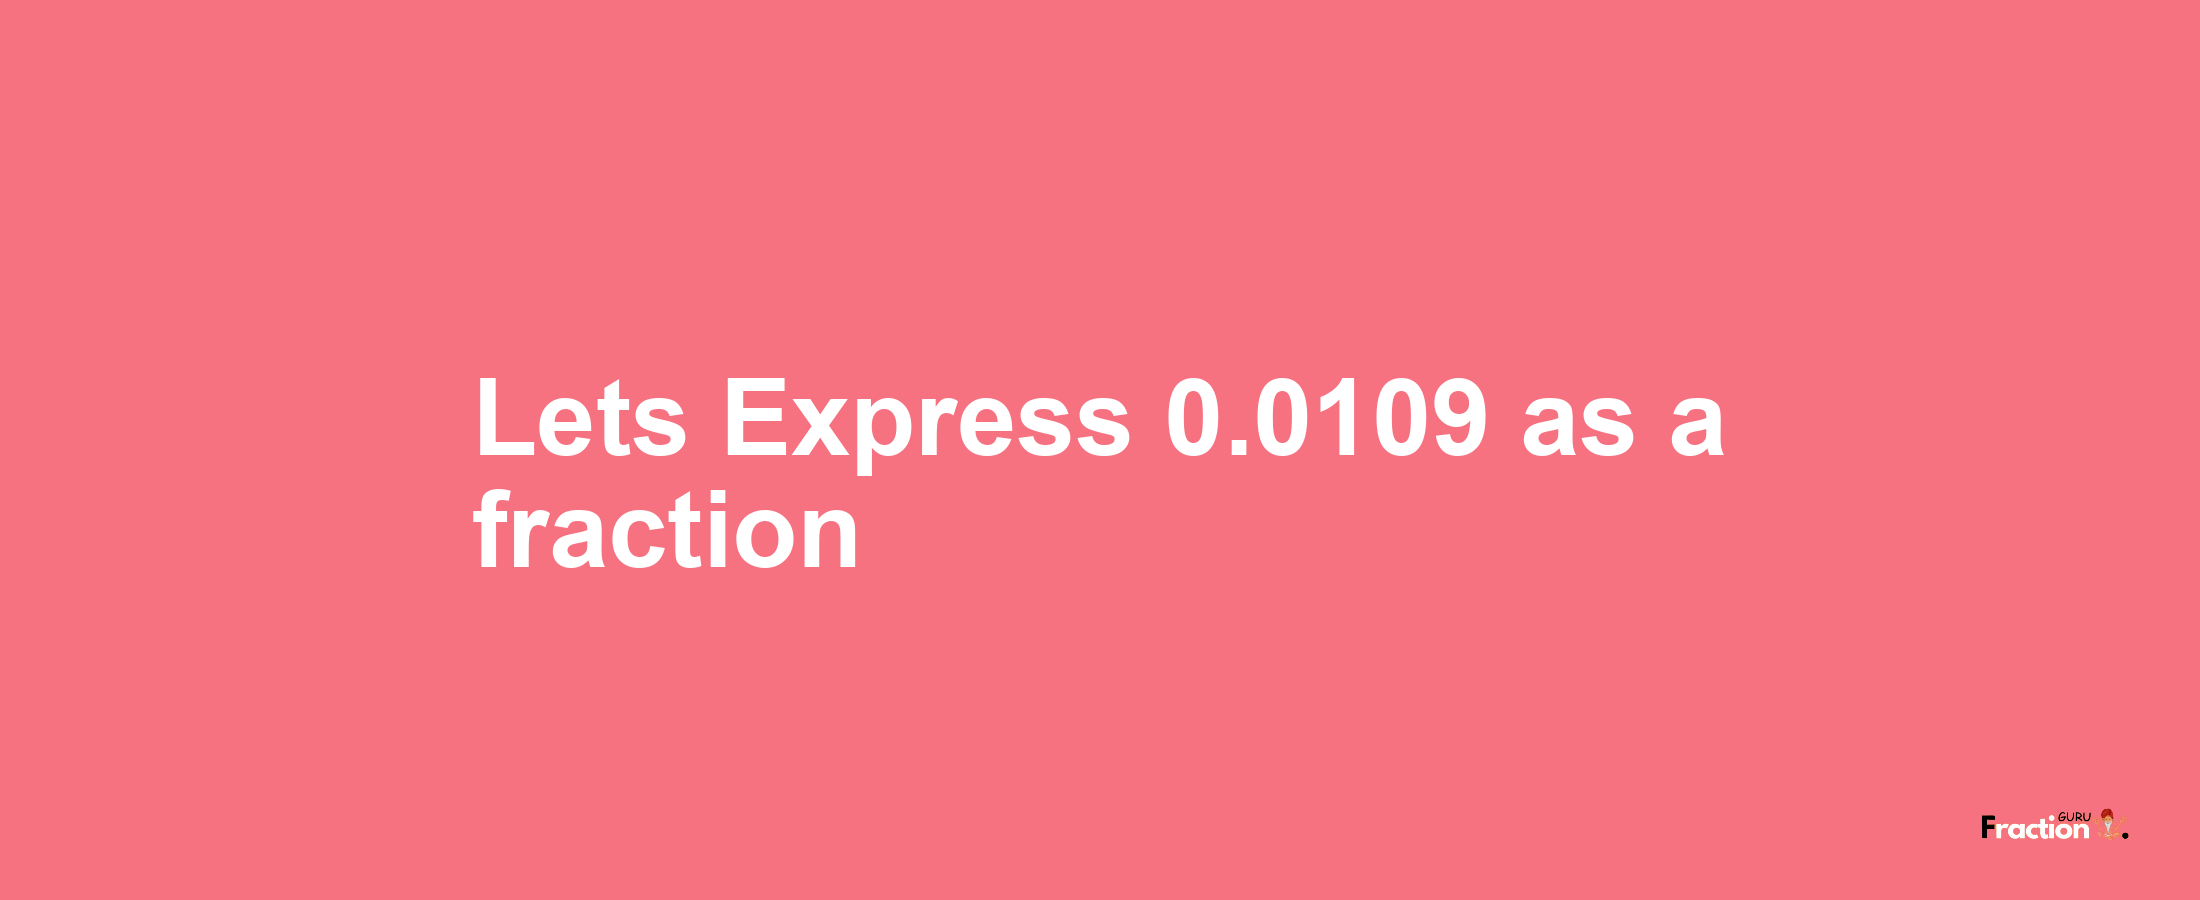 Lets Express 0.0109 as afraction